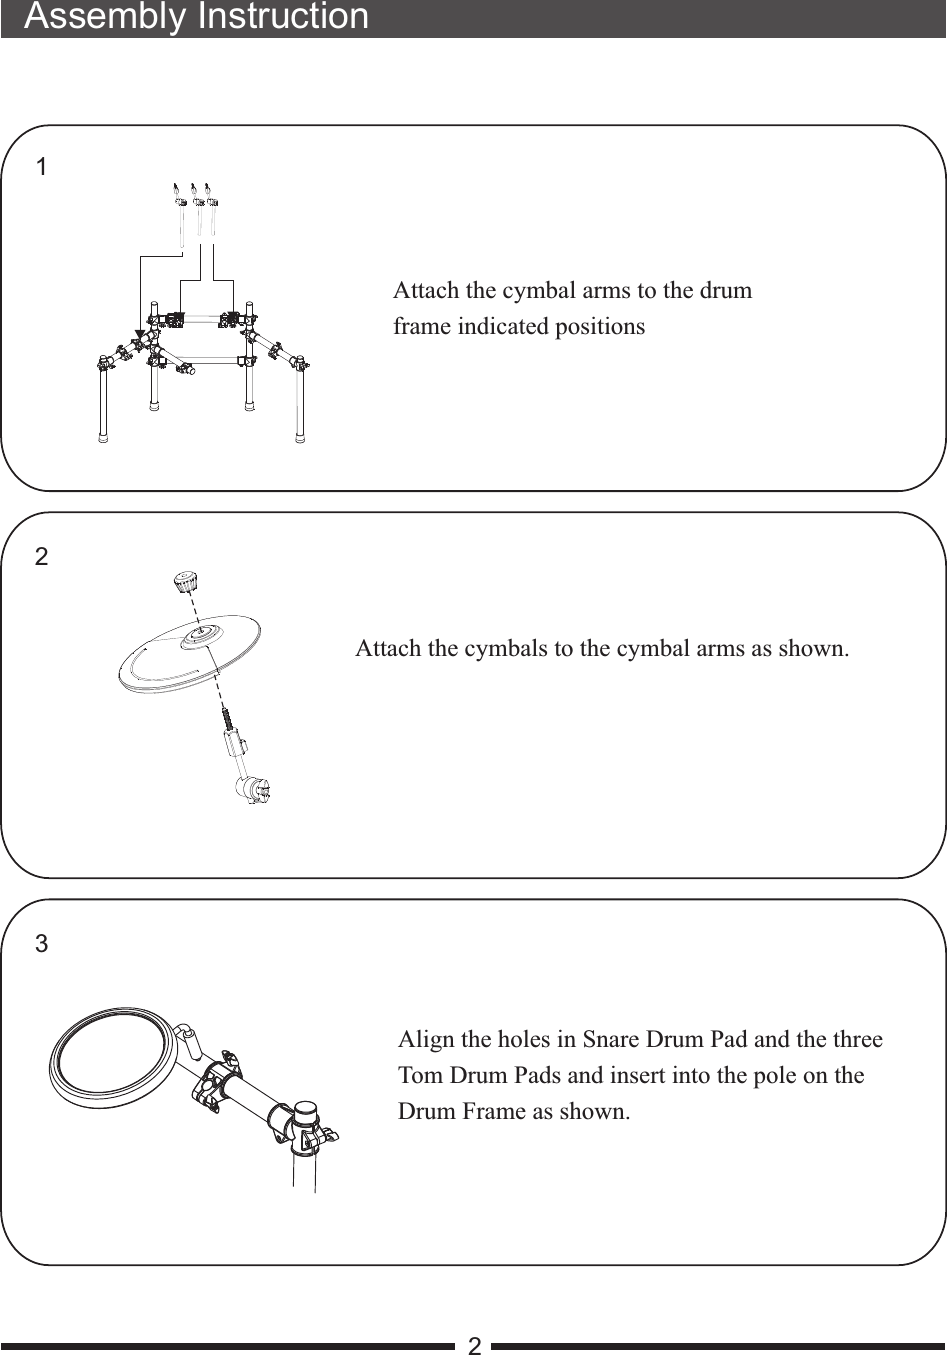 21Attach the cymbal arms to the drum frame indicated positionsAlign the holes in Snare Drum Pad and the three Tom Drum Pads and insert into the pole on theDrum Frame as shown.23Assembly InstructionAttach the cymbals to the cymbal arms as shown.